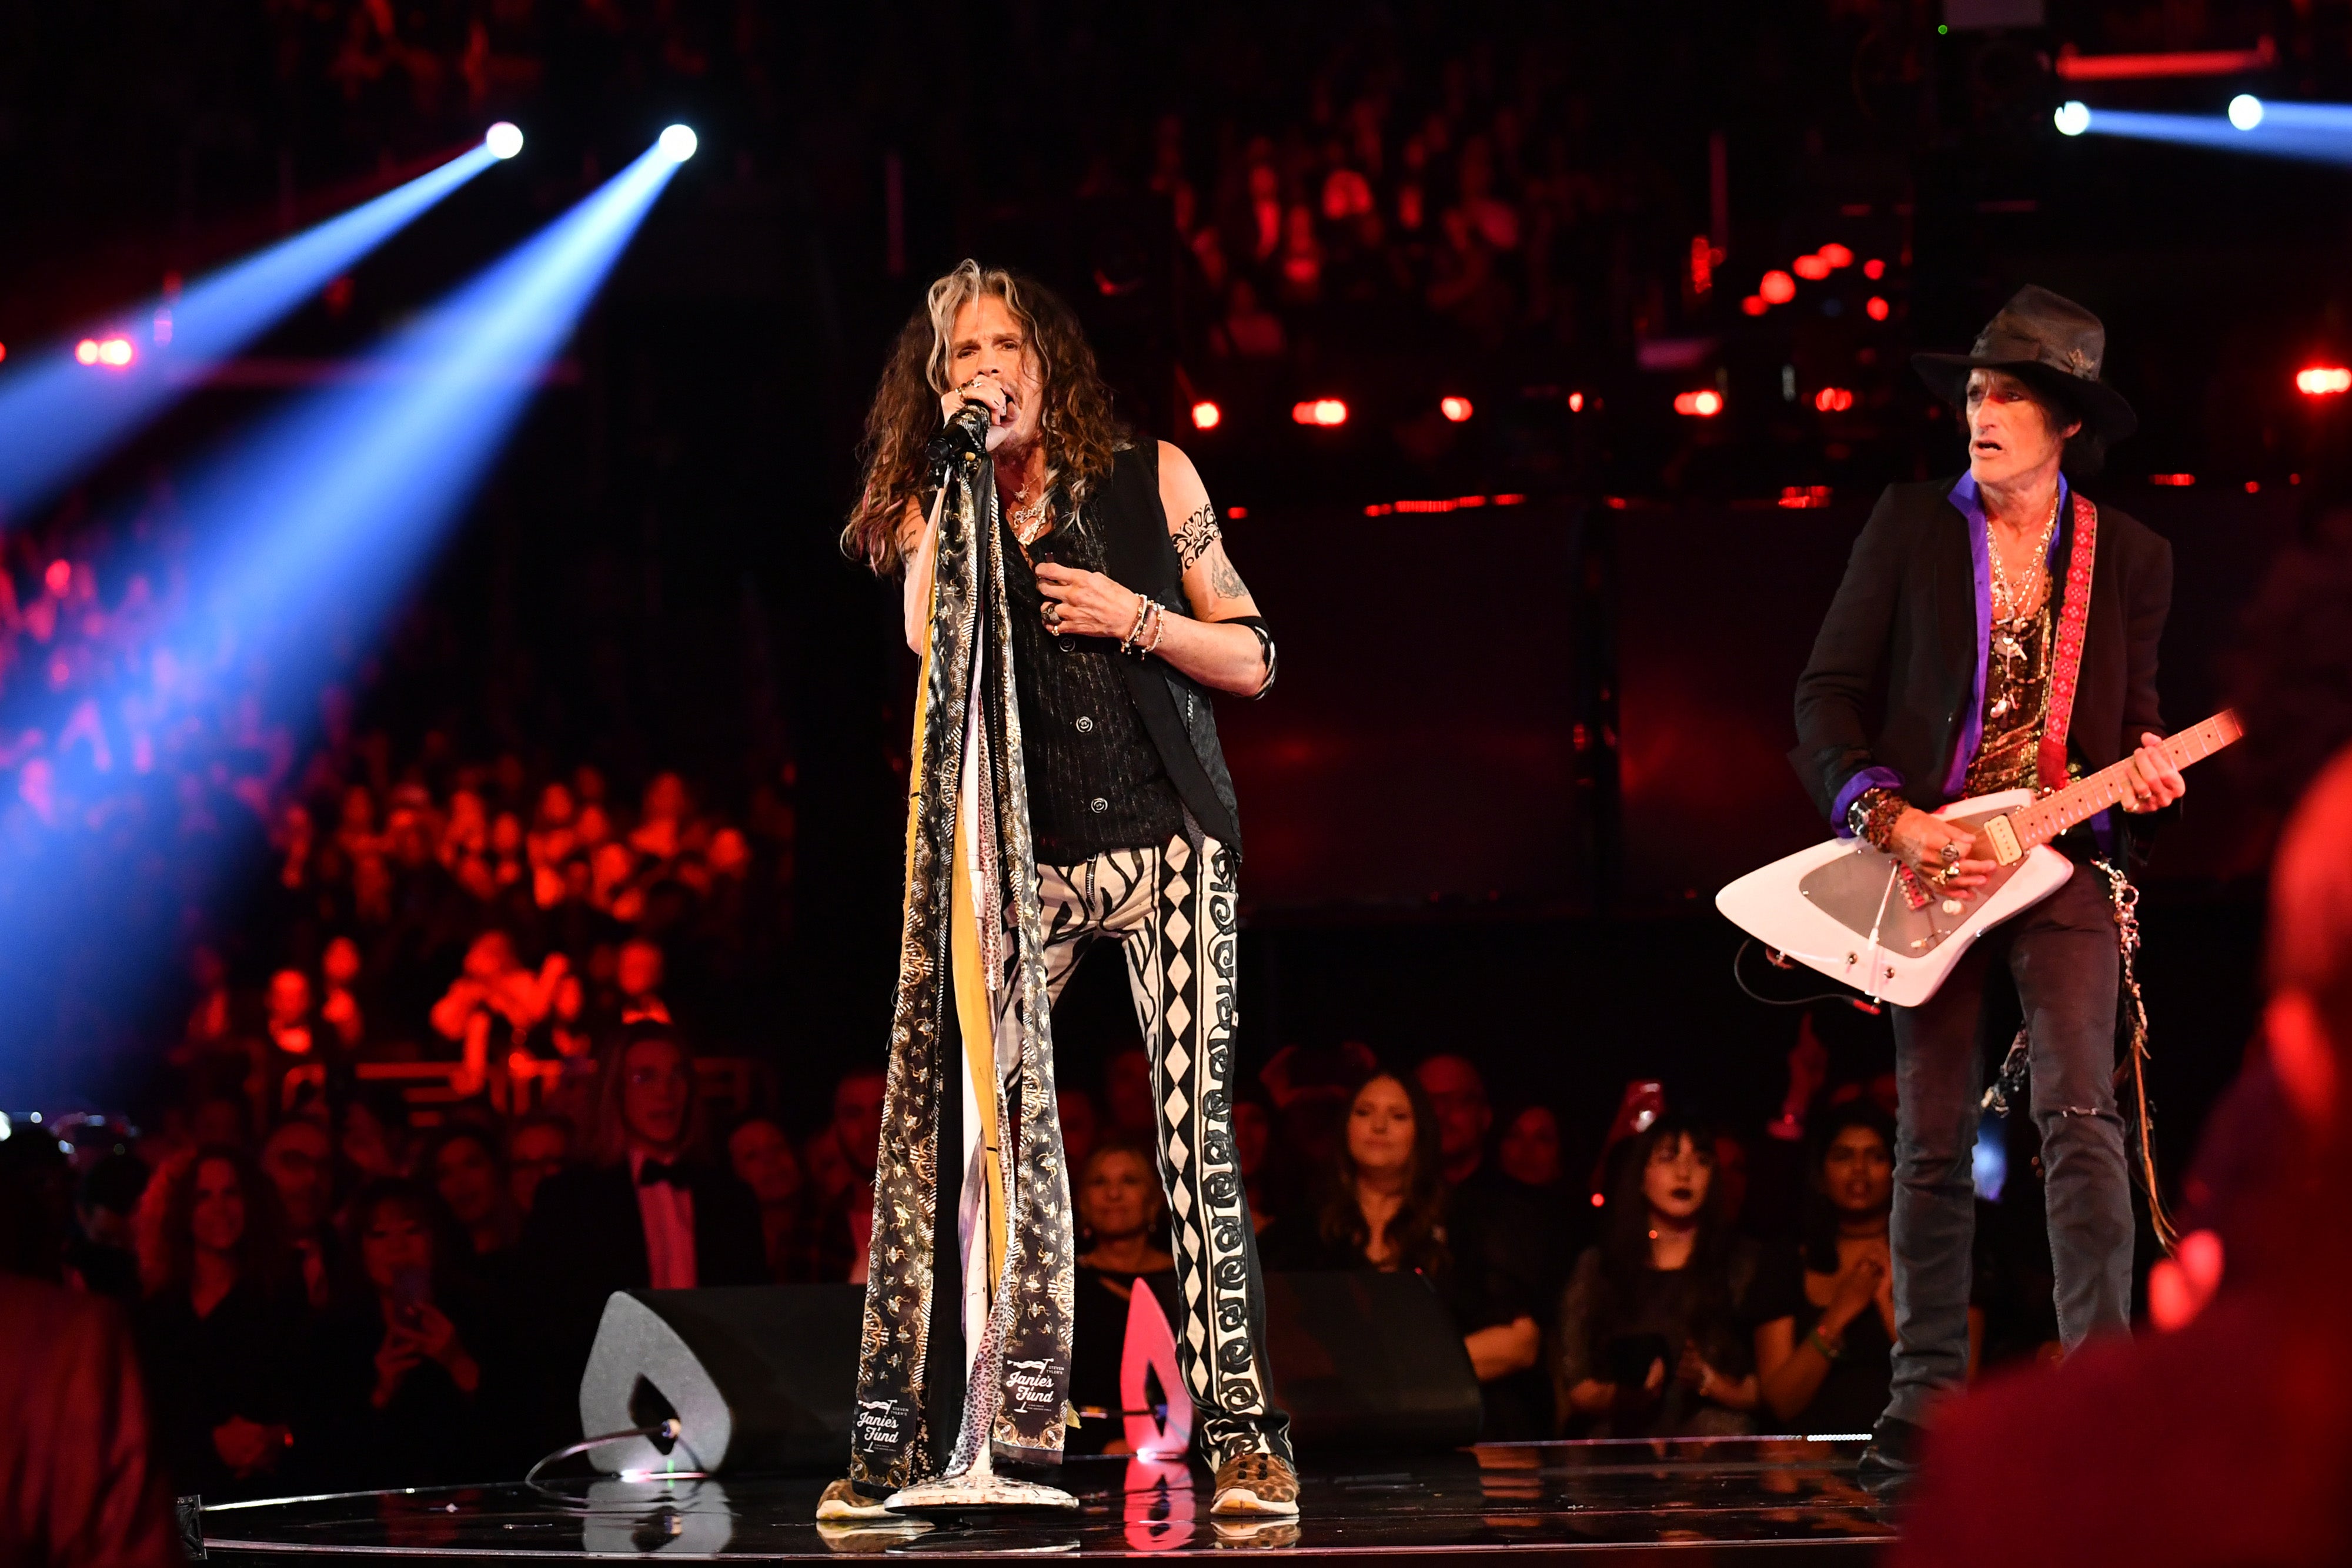 Steven Tyler performs at the Grammys